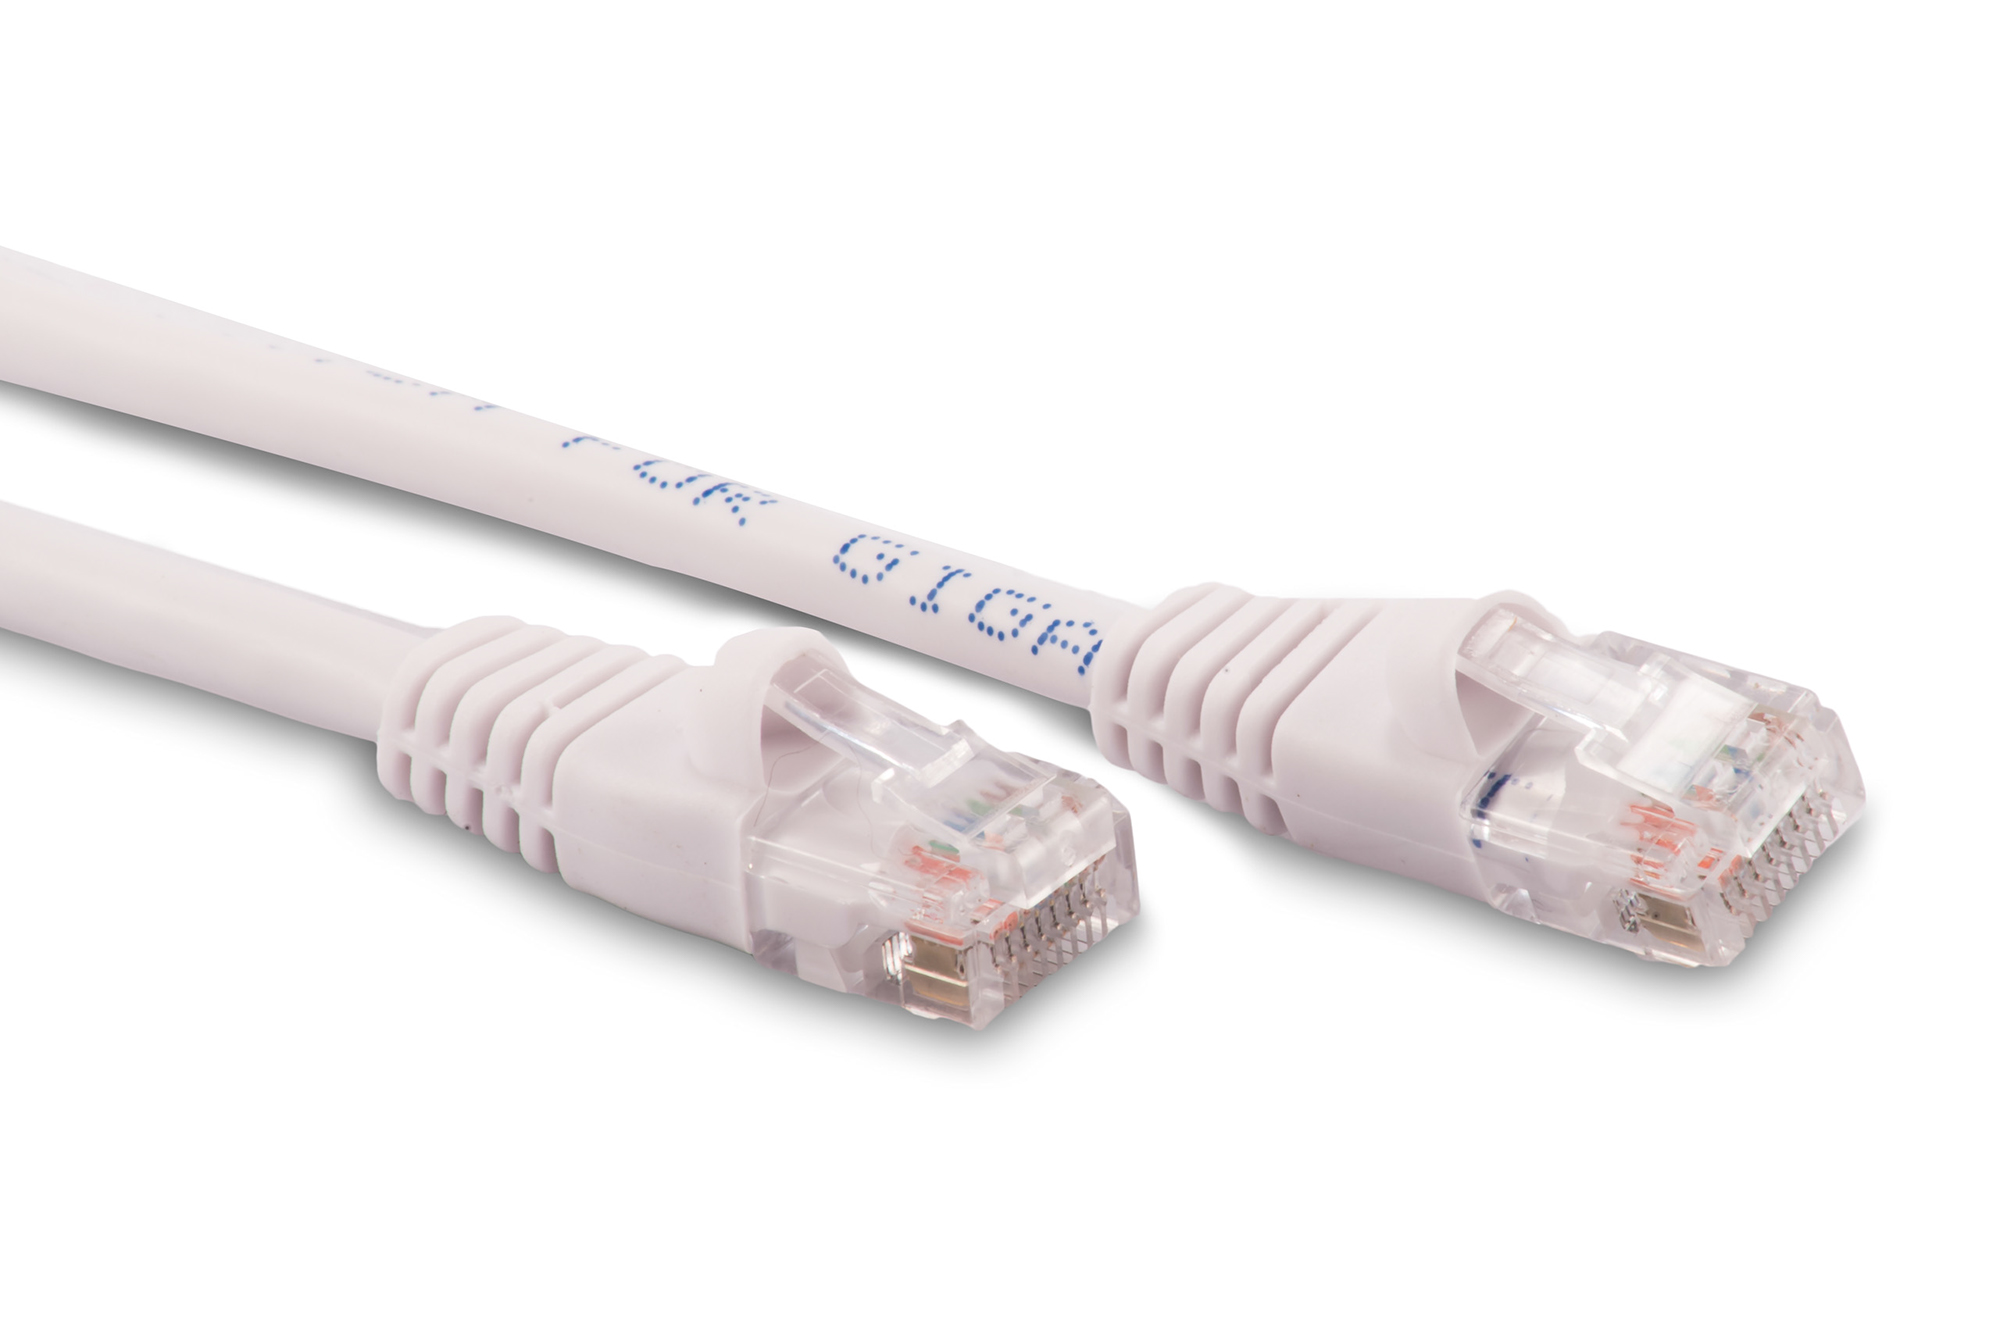 5ft Cat5e Ethernet Patch Cable - White Color - Snagless Boot